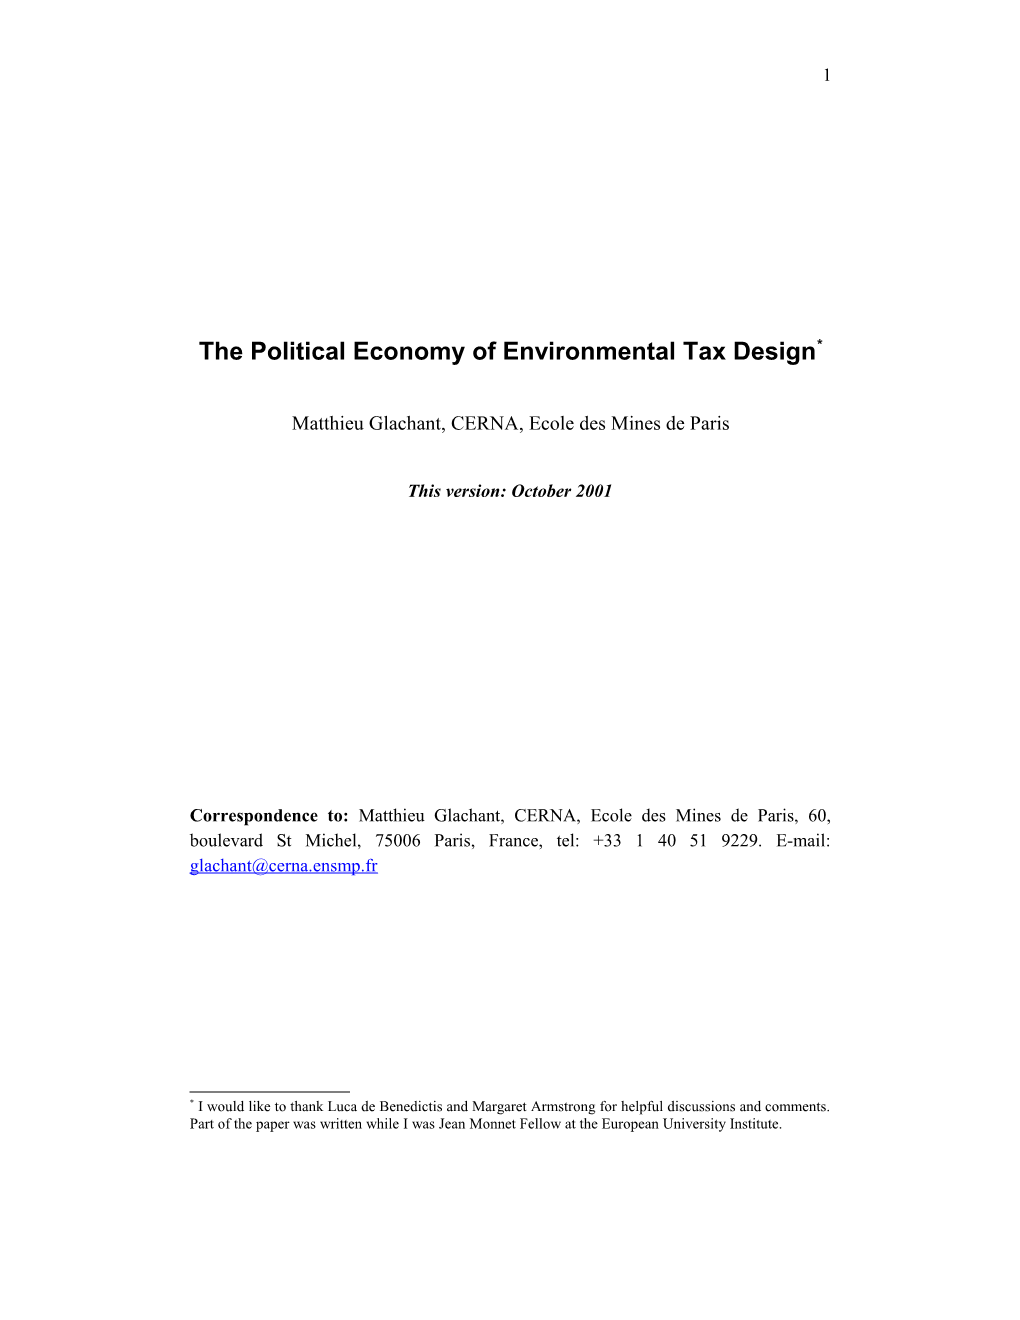 A Note on the Political Economy of Environmental Tax Design